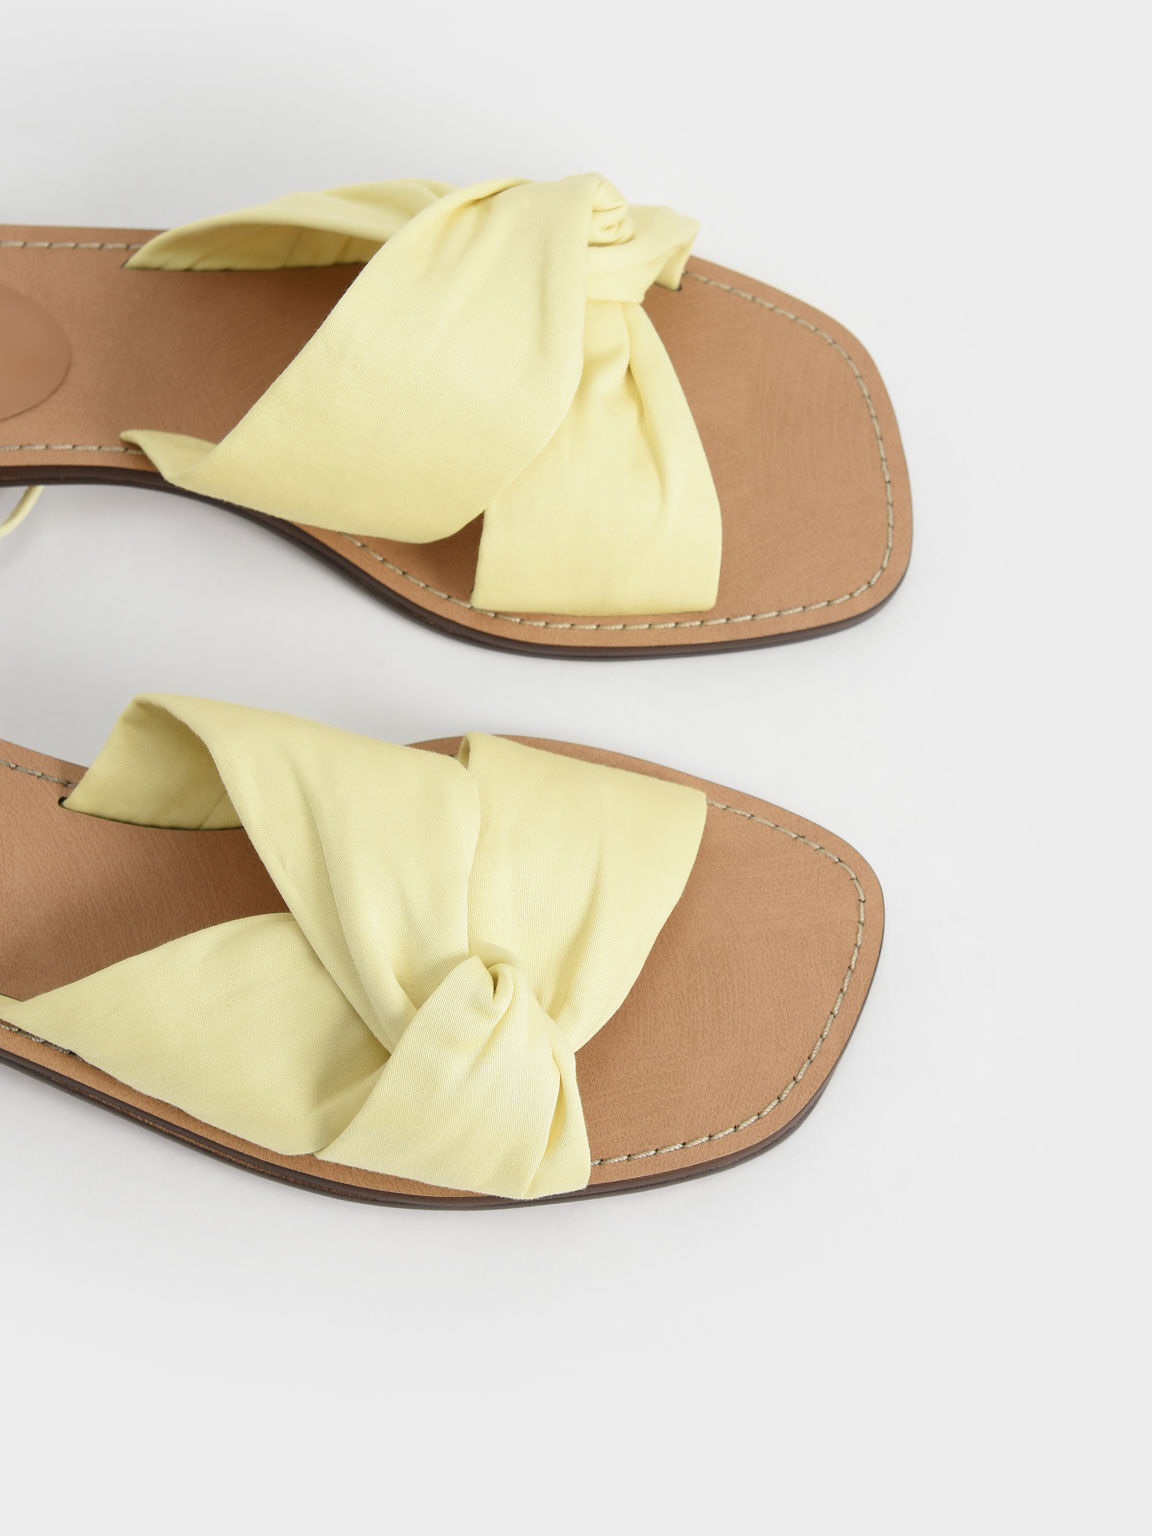 Sandal Knotted Tie-Around, Yellow, hi-res